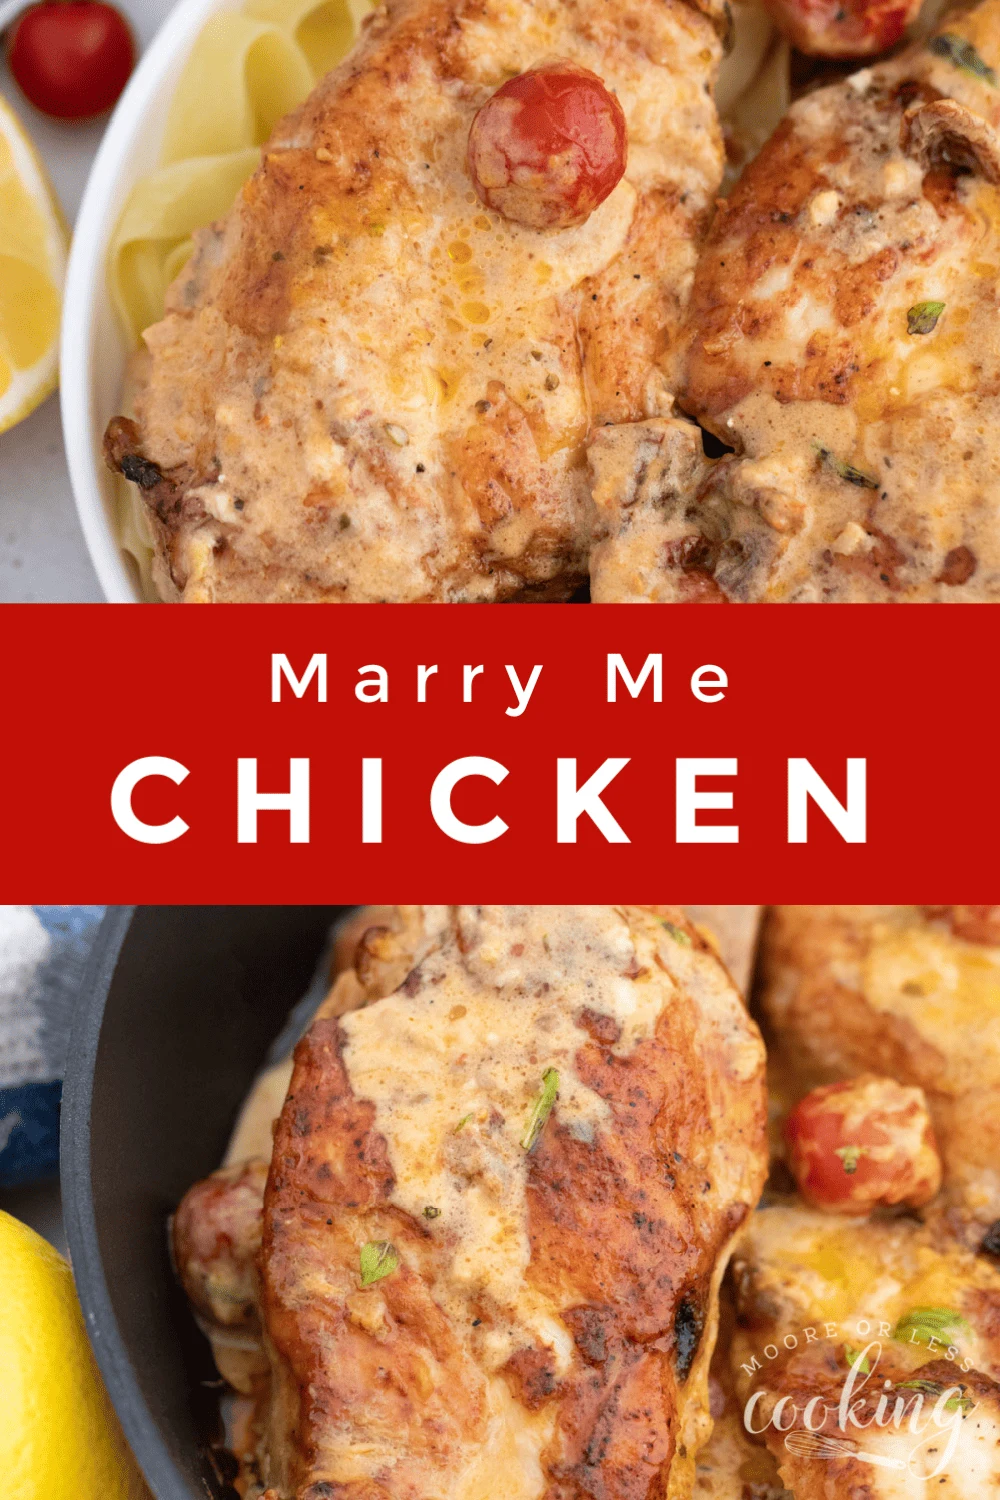 Marry Me Chicken is a delicious and simple to make chicken breast recipe made up of herbs, garlic, sun-dried tomatoes, parmesan cheese, and heavy cream. via @Mooreorlesscook